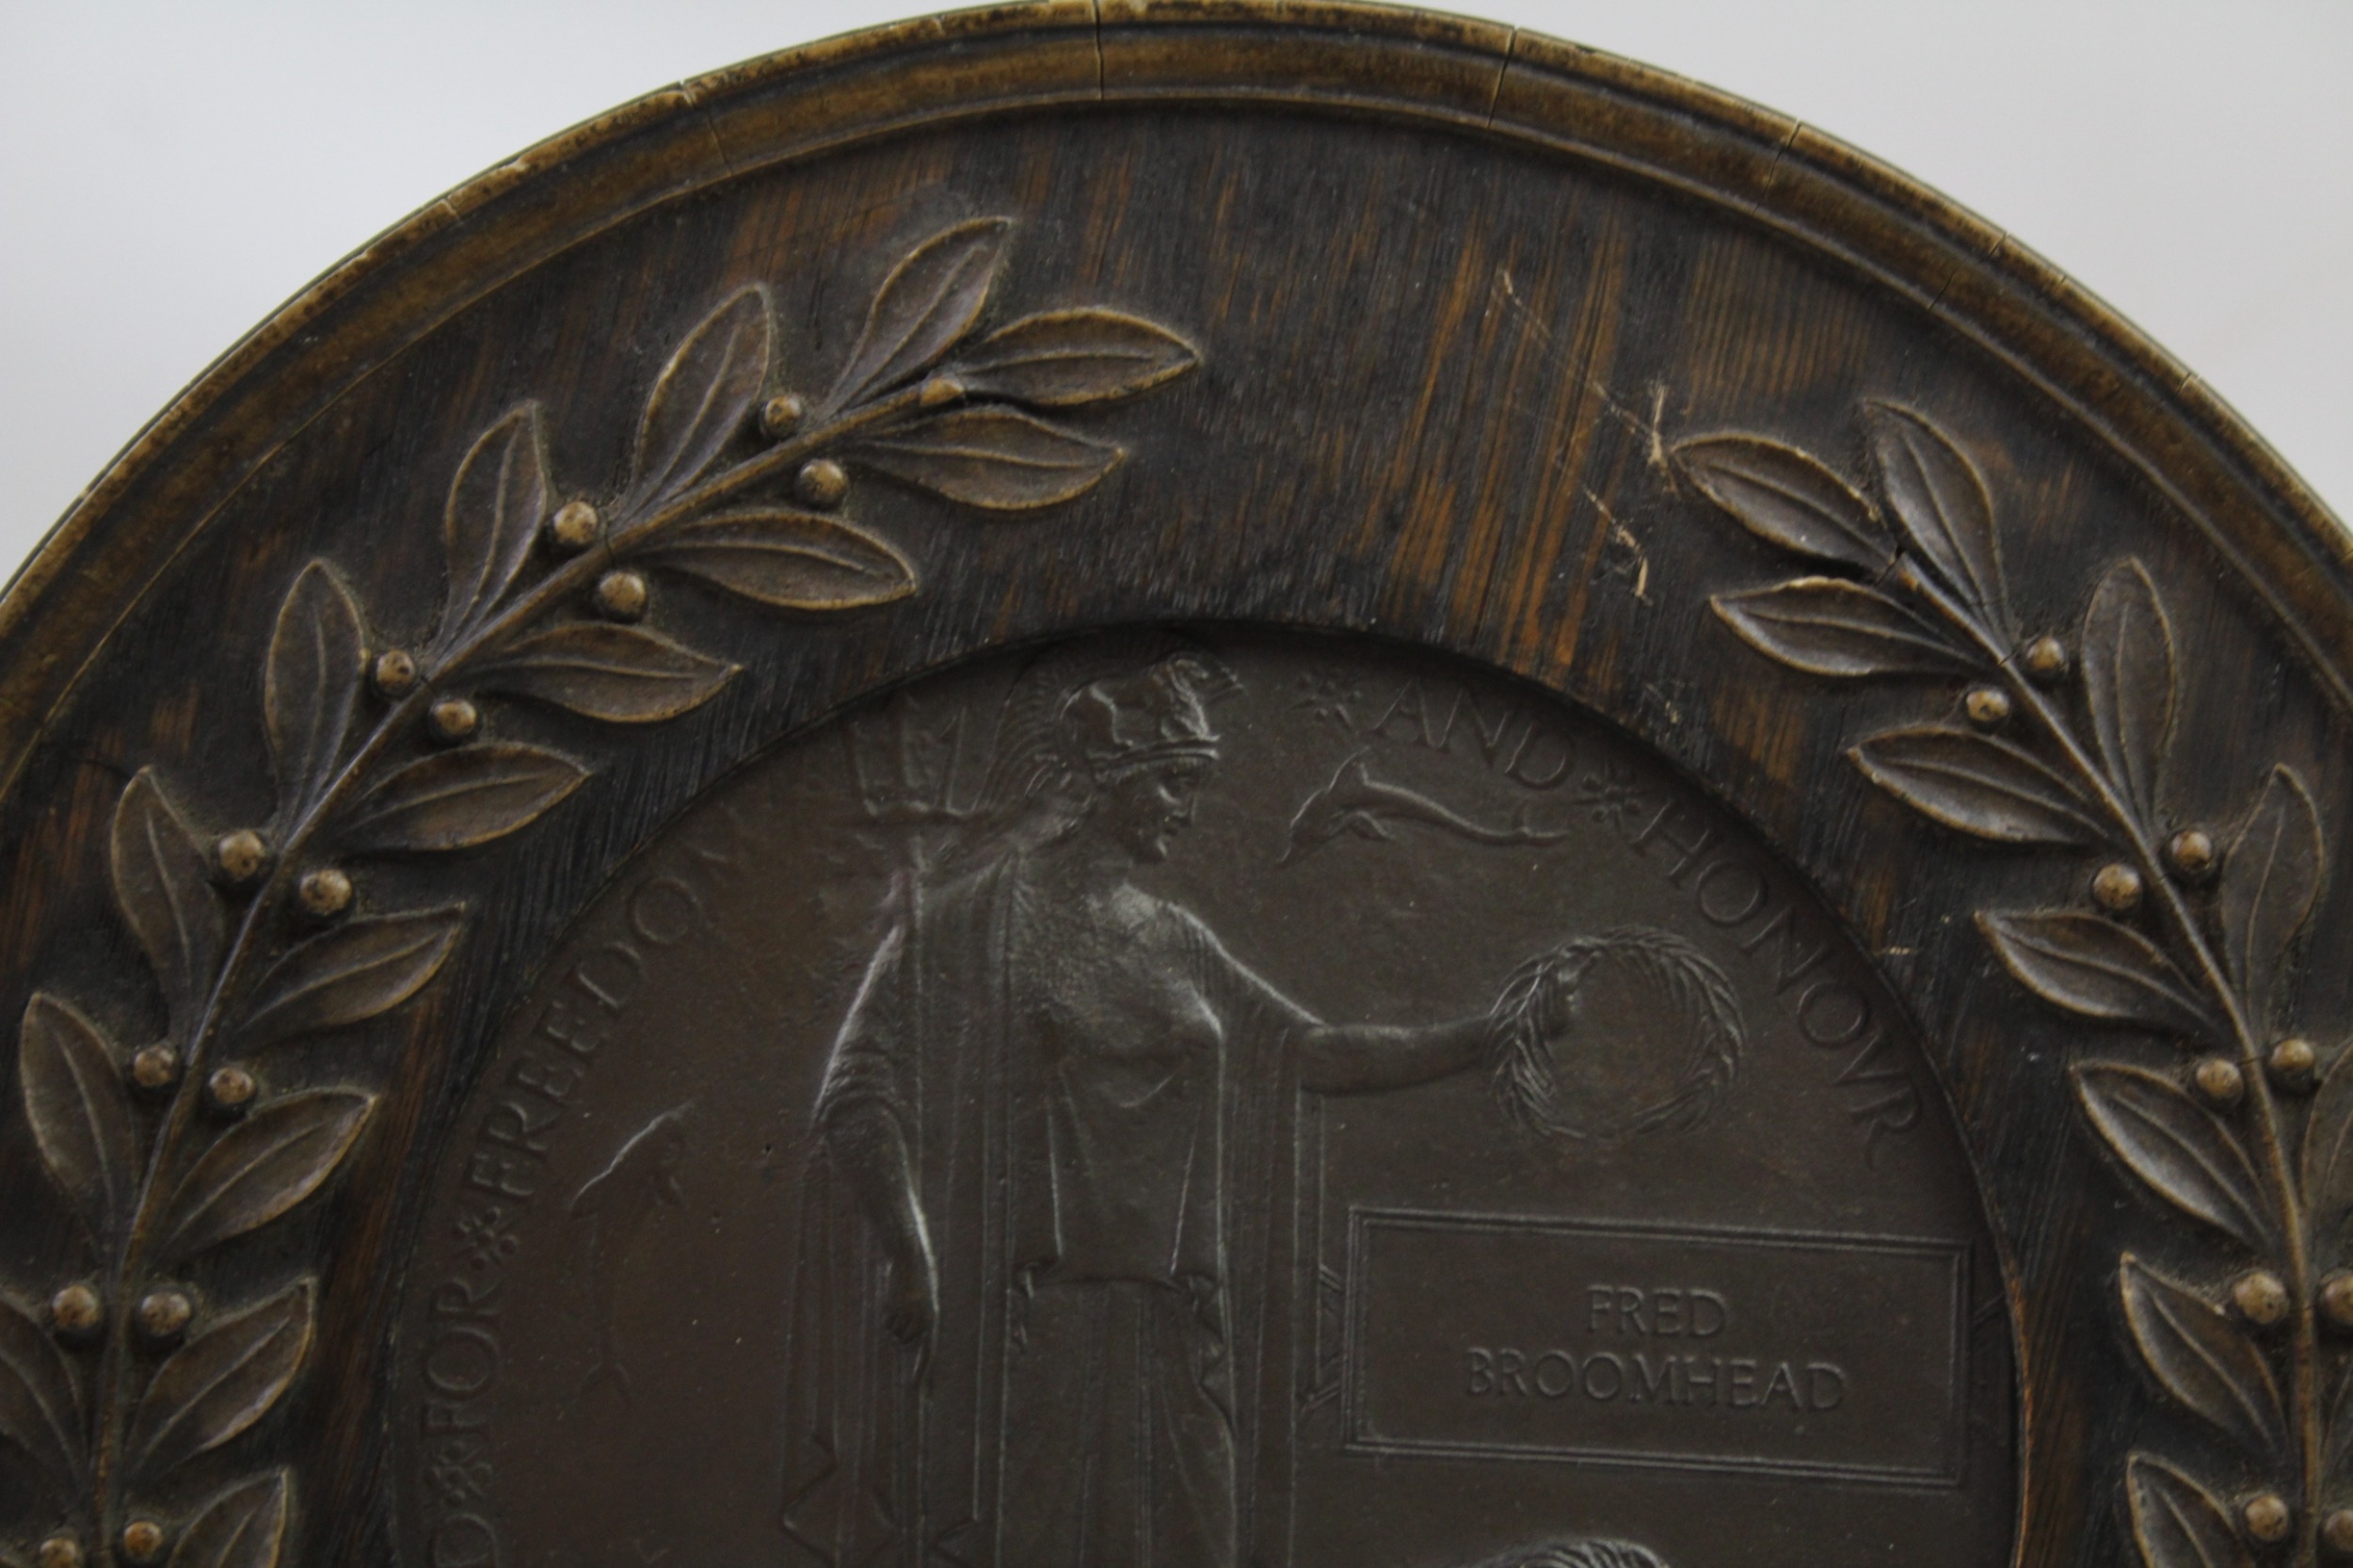 WW1 Death Plaque Mounted in Wooden Frame, Named Fred Broomhead - Image 2 of 7